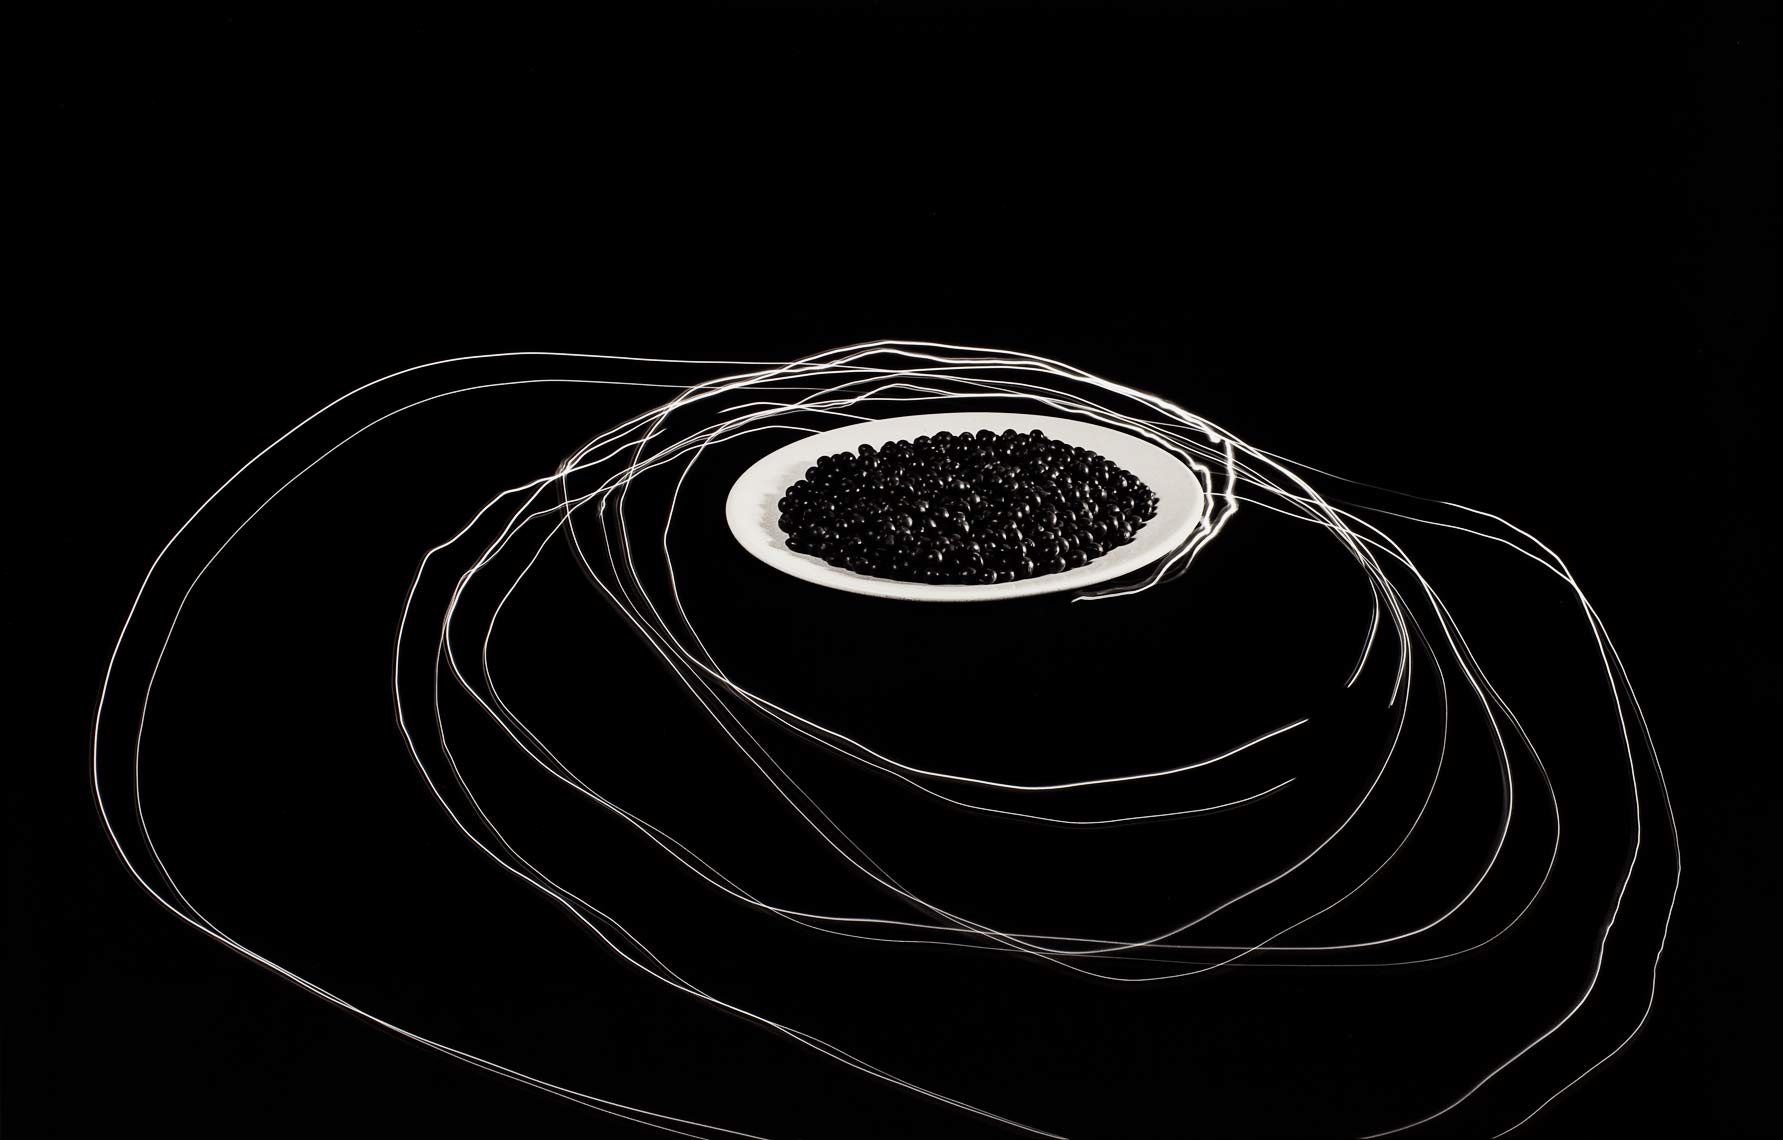 David Lebe; Food For Thought 3, 1992, light drawing, black and white photograph